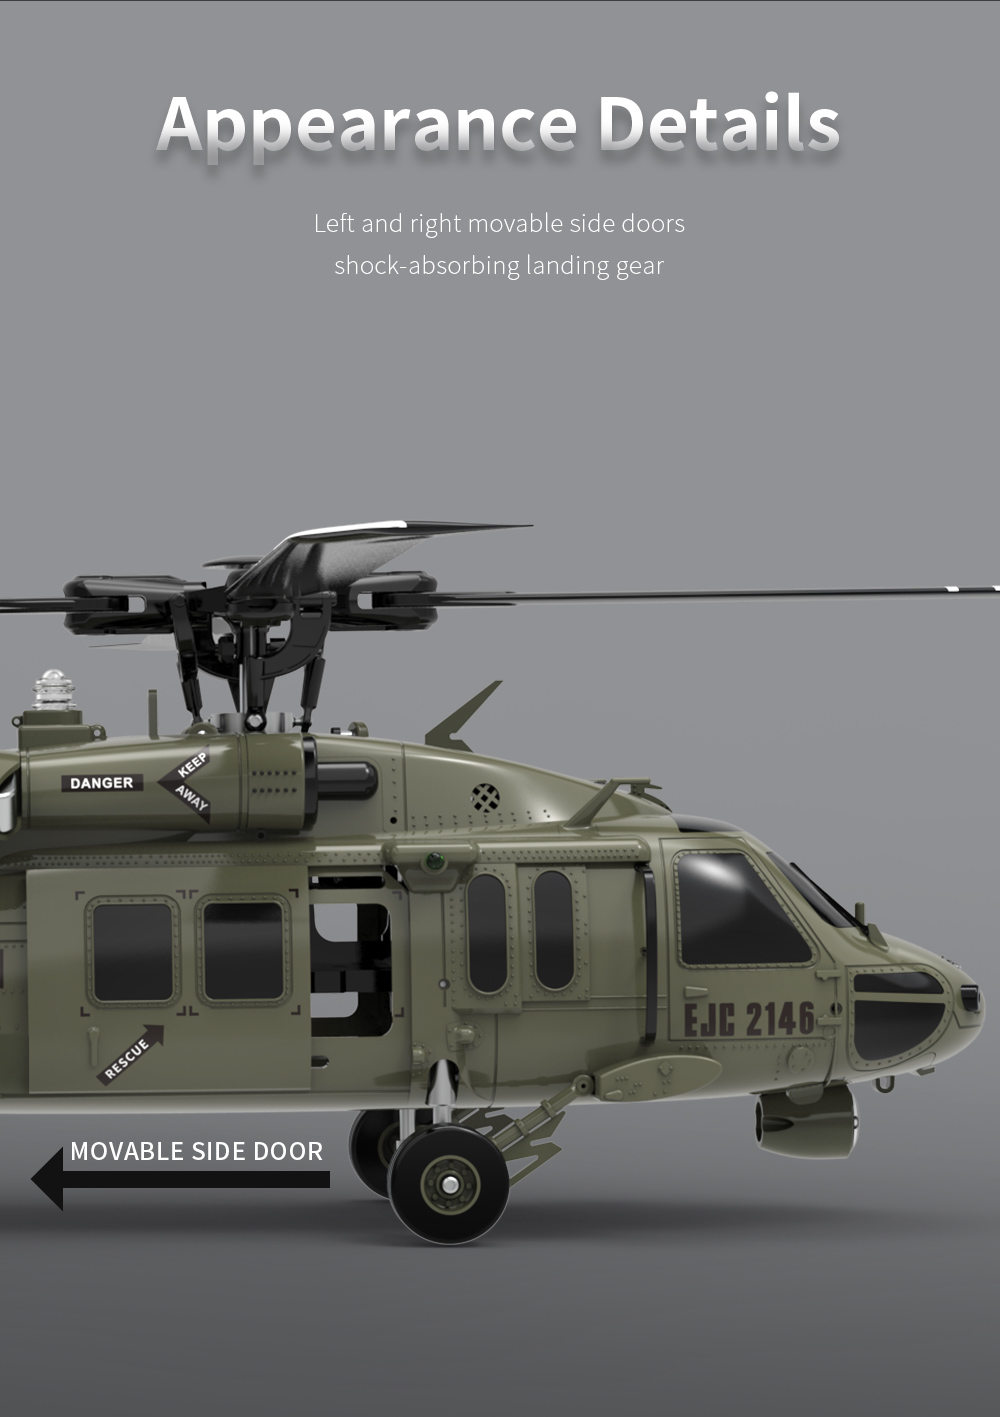 UH-60 Black Hawk RC Military Helicopter (types of military helicopters, airforce helicopter, russian military helicopters, military helicopter for sale)